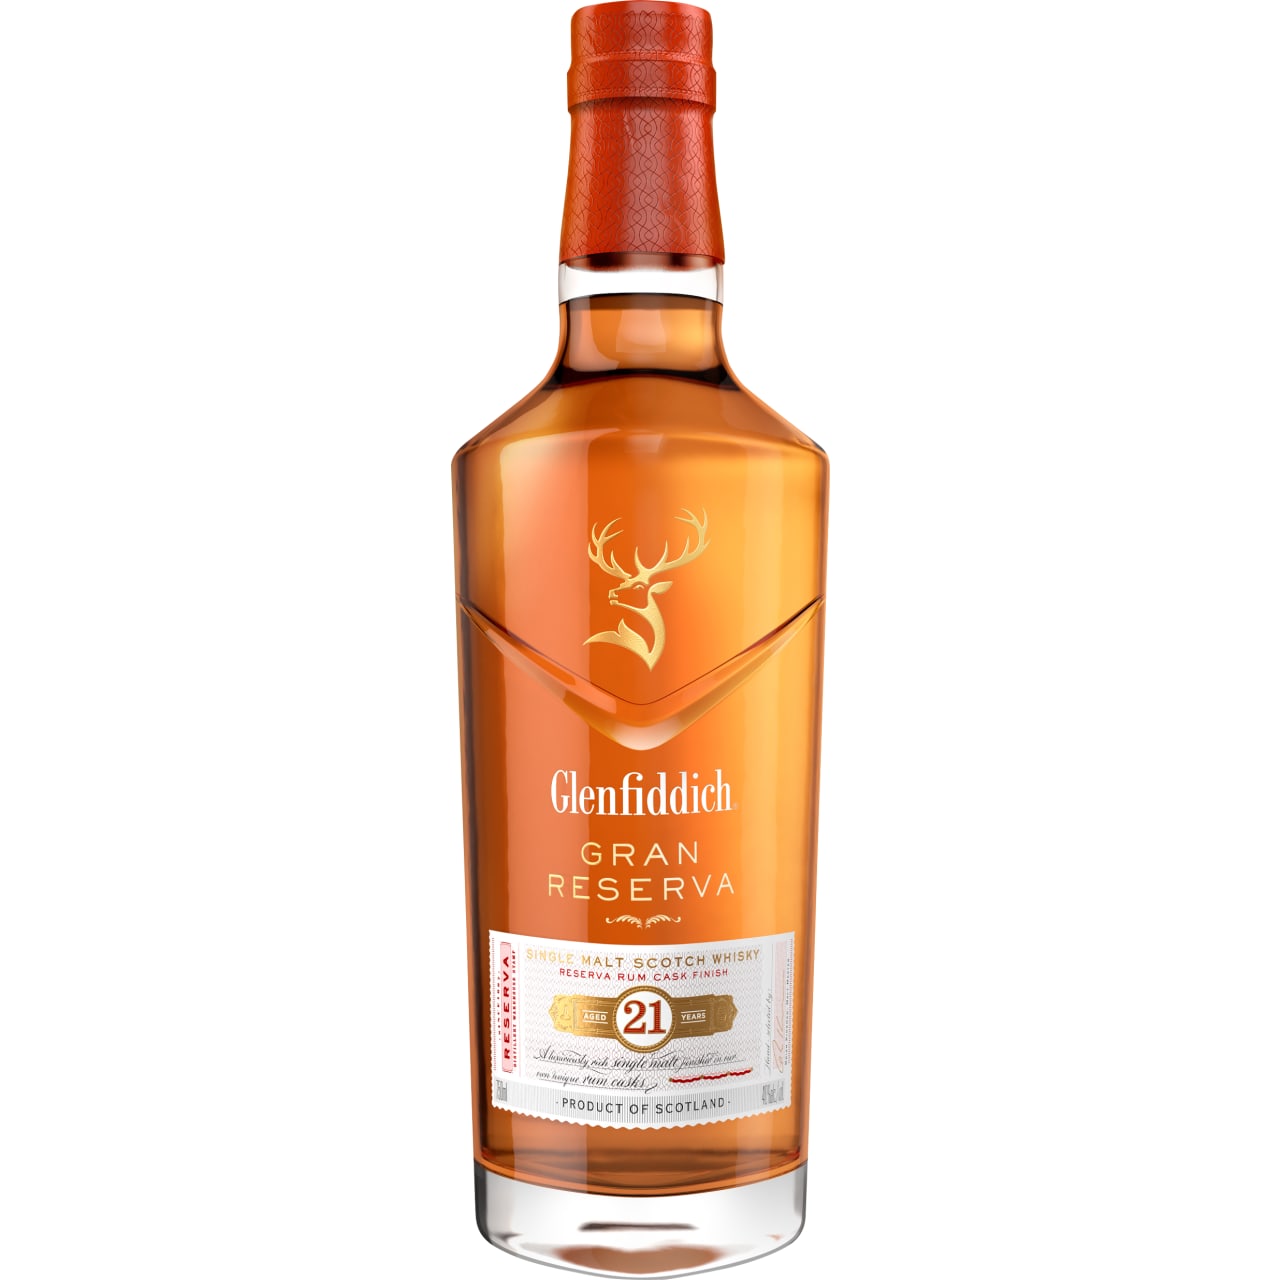 The award winning Glenfiddich 21 year old has been aged in casks that once contained premium Caribbean rum - and these are used to finish this 21 Year Old expression. This dark gold single malt has a sweet vanilla aroma. On the palate it offers a complex mix of citrus and spice flavours and even a touch of smoke. Its finish is very long, dry and spicy.